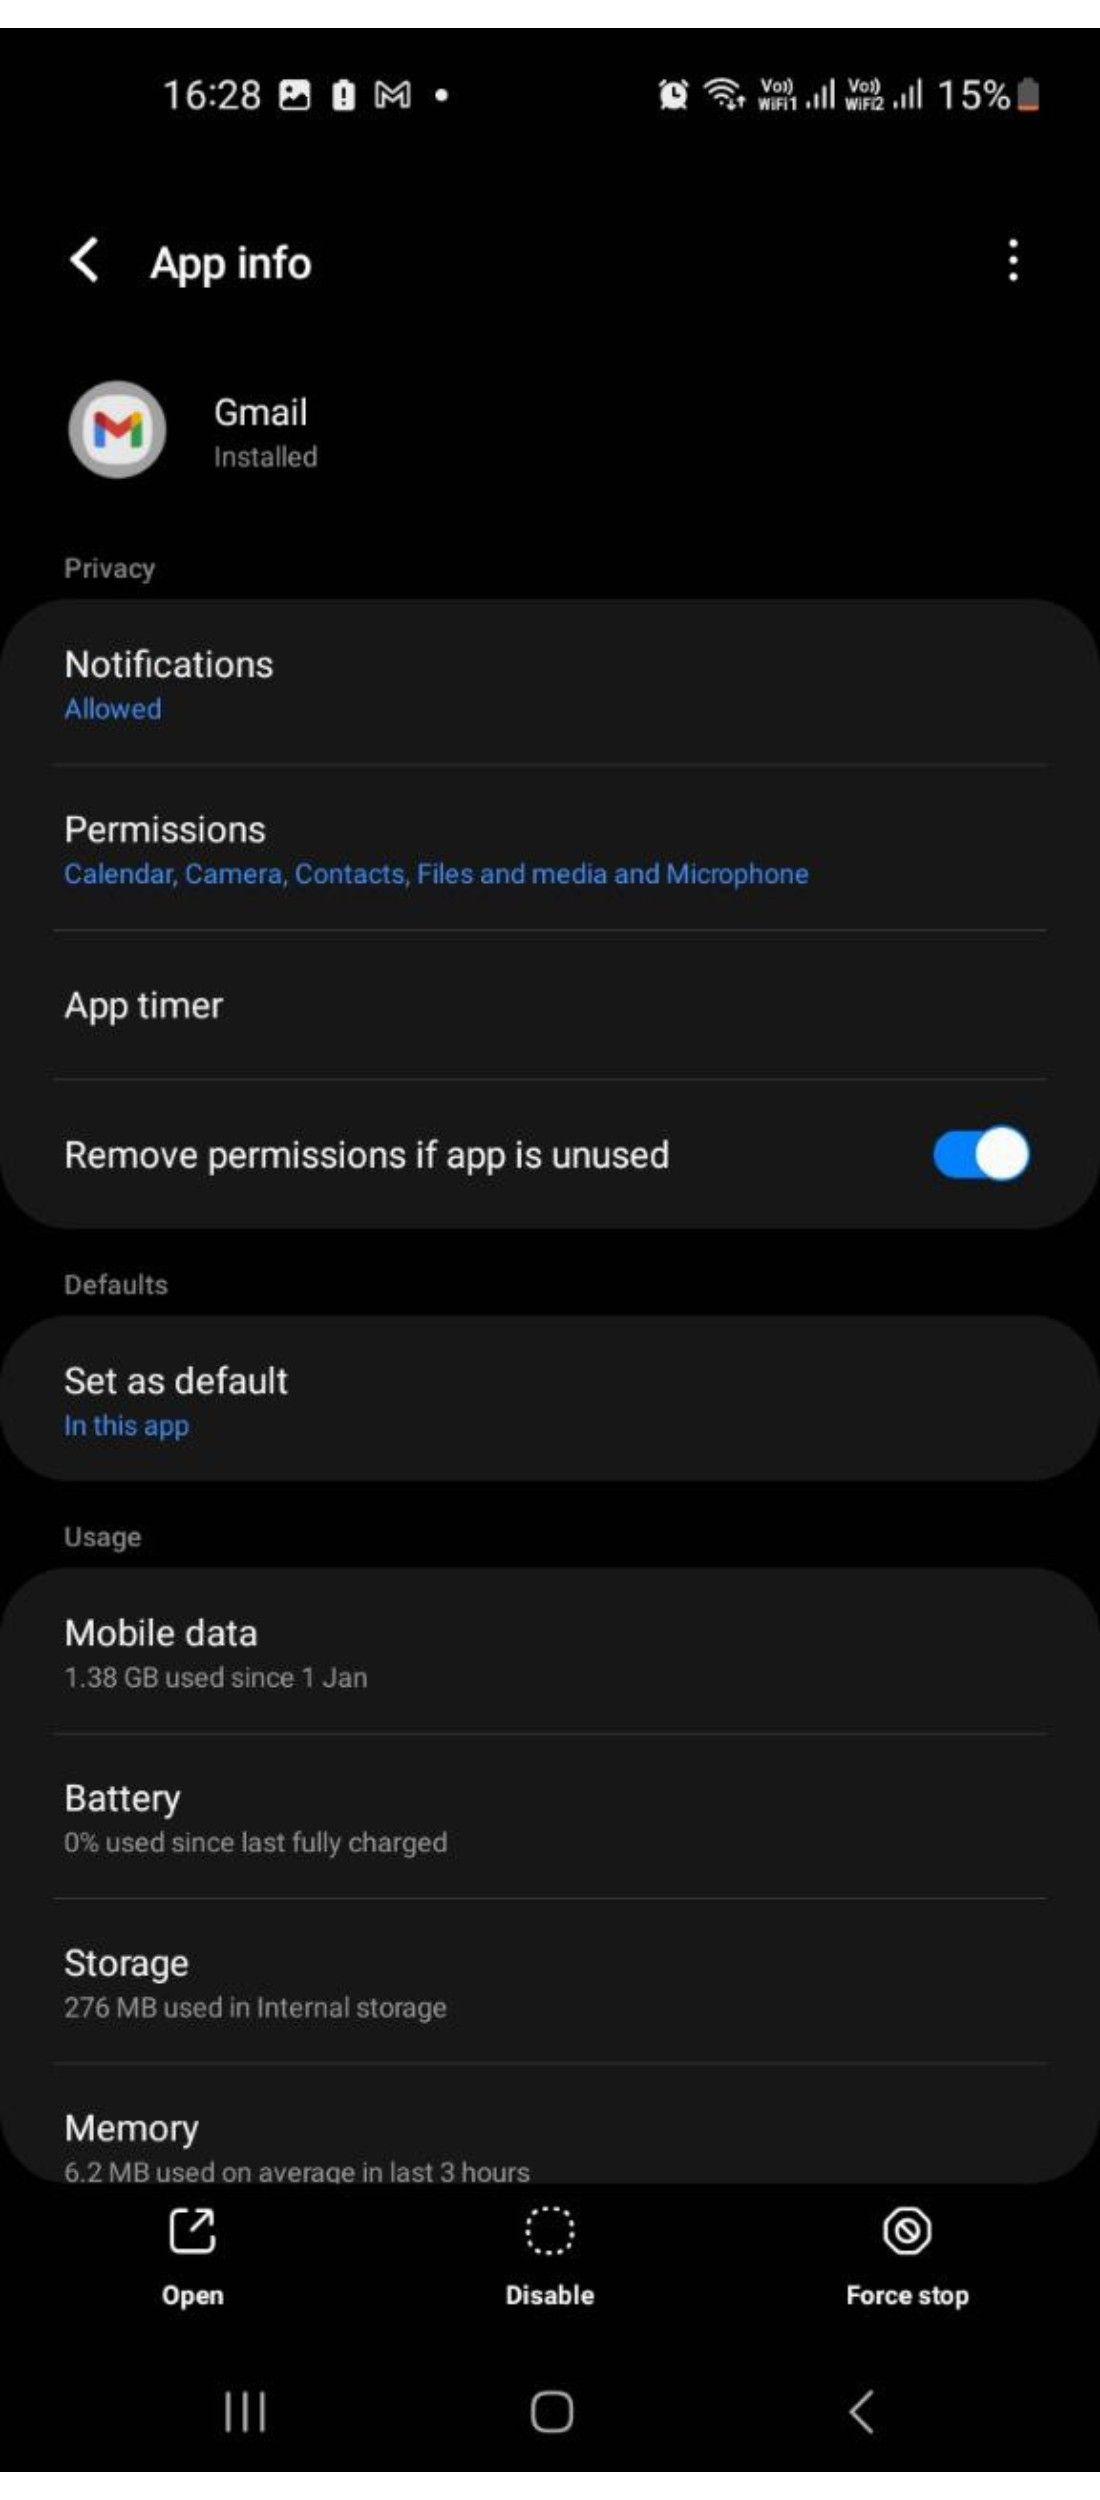 App information and details for Gmail